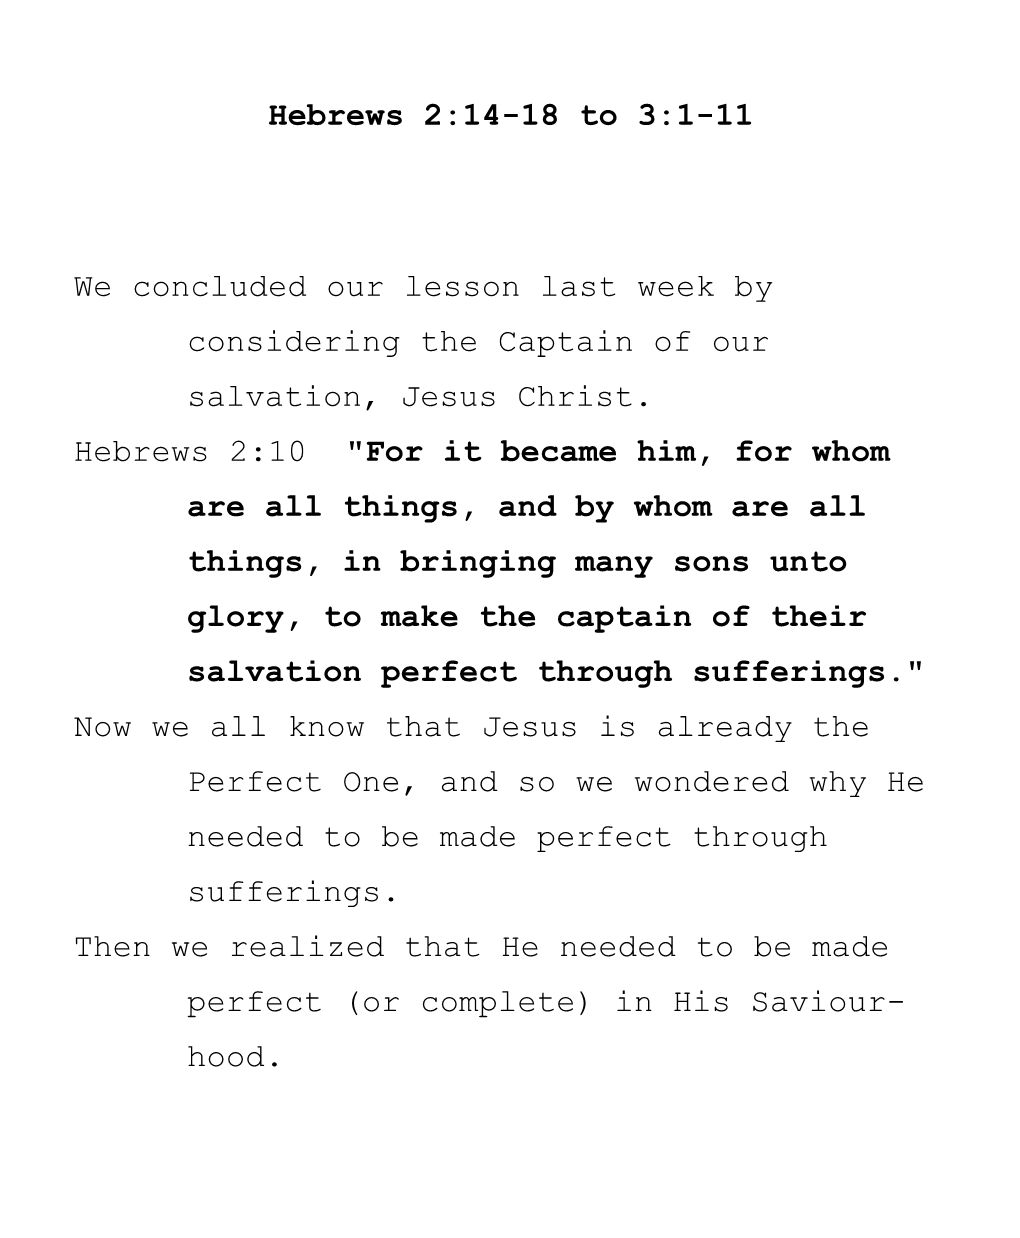 We Concluded Our Lesson Last Week by Considering the Captain of Our Salvation, Jesus Christ